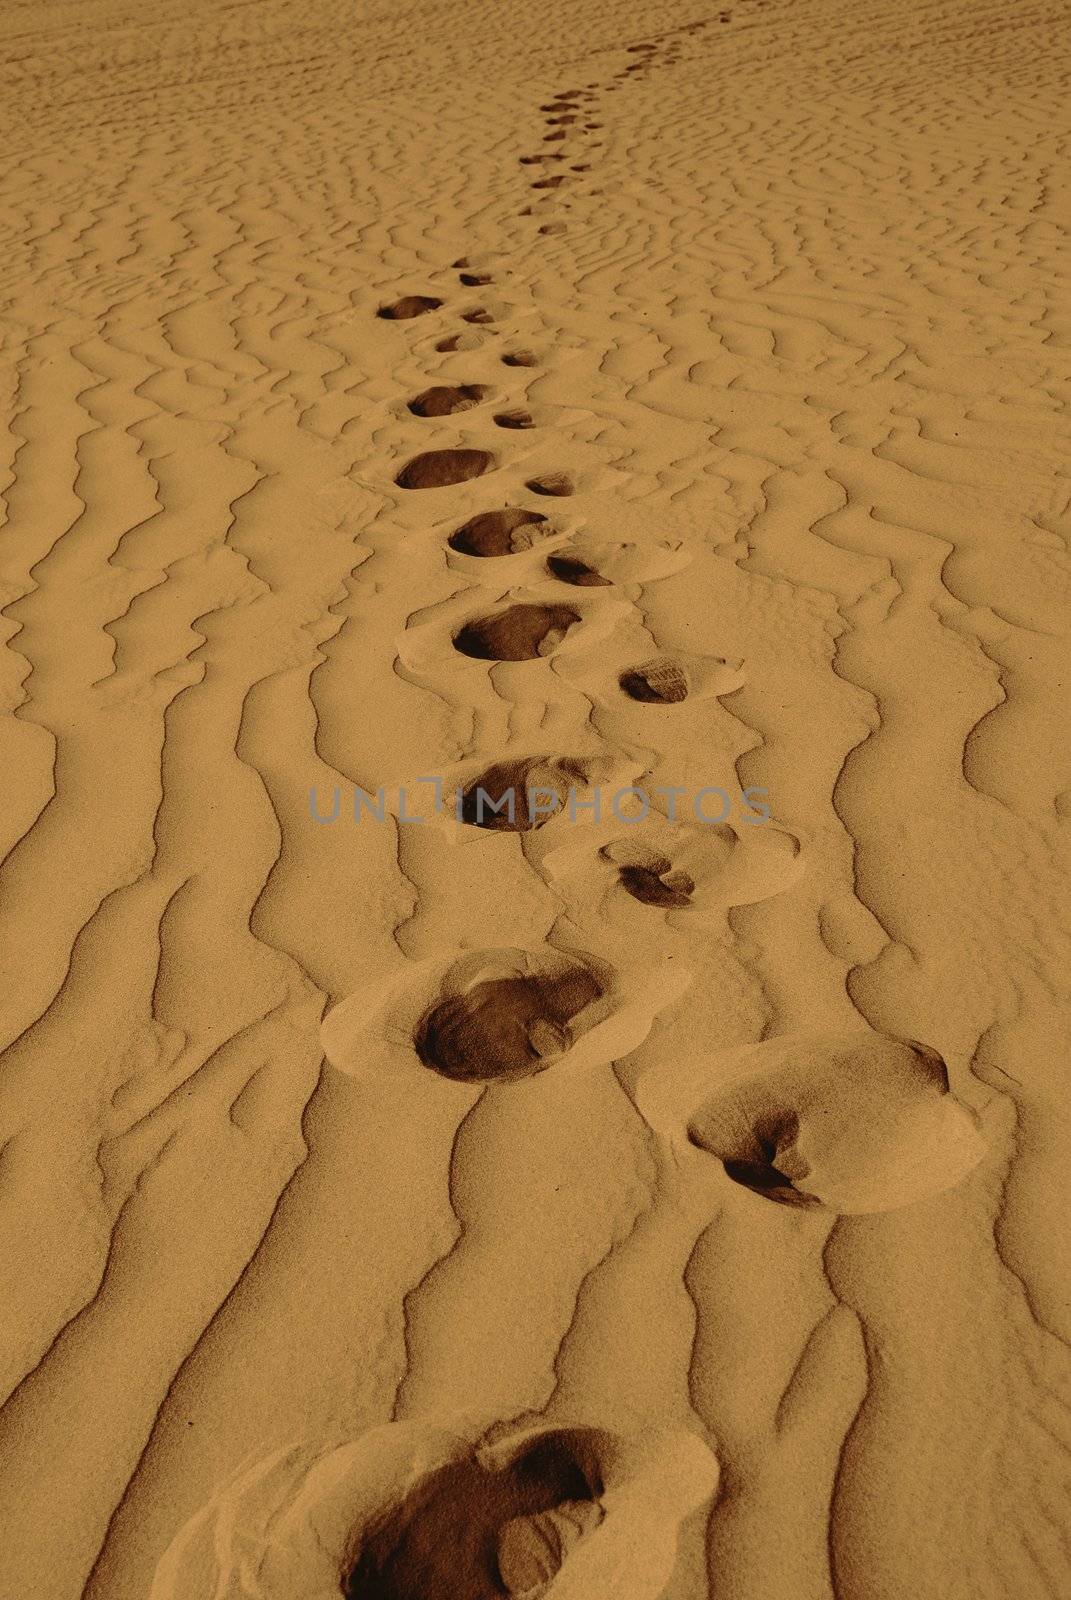 Veritcal Footprints in the Sand by pixelsnap